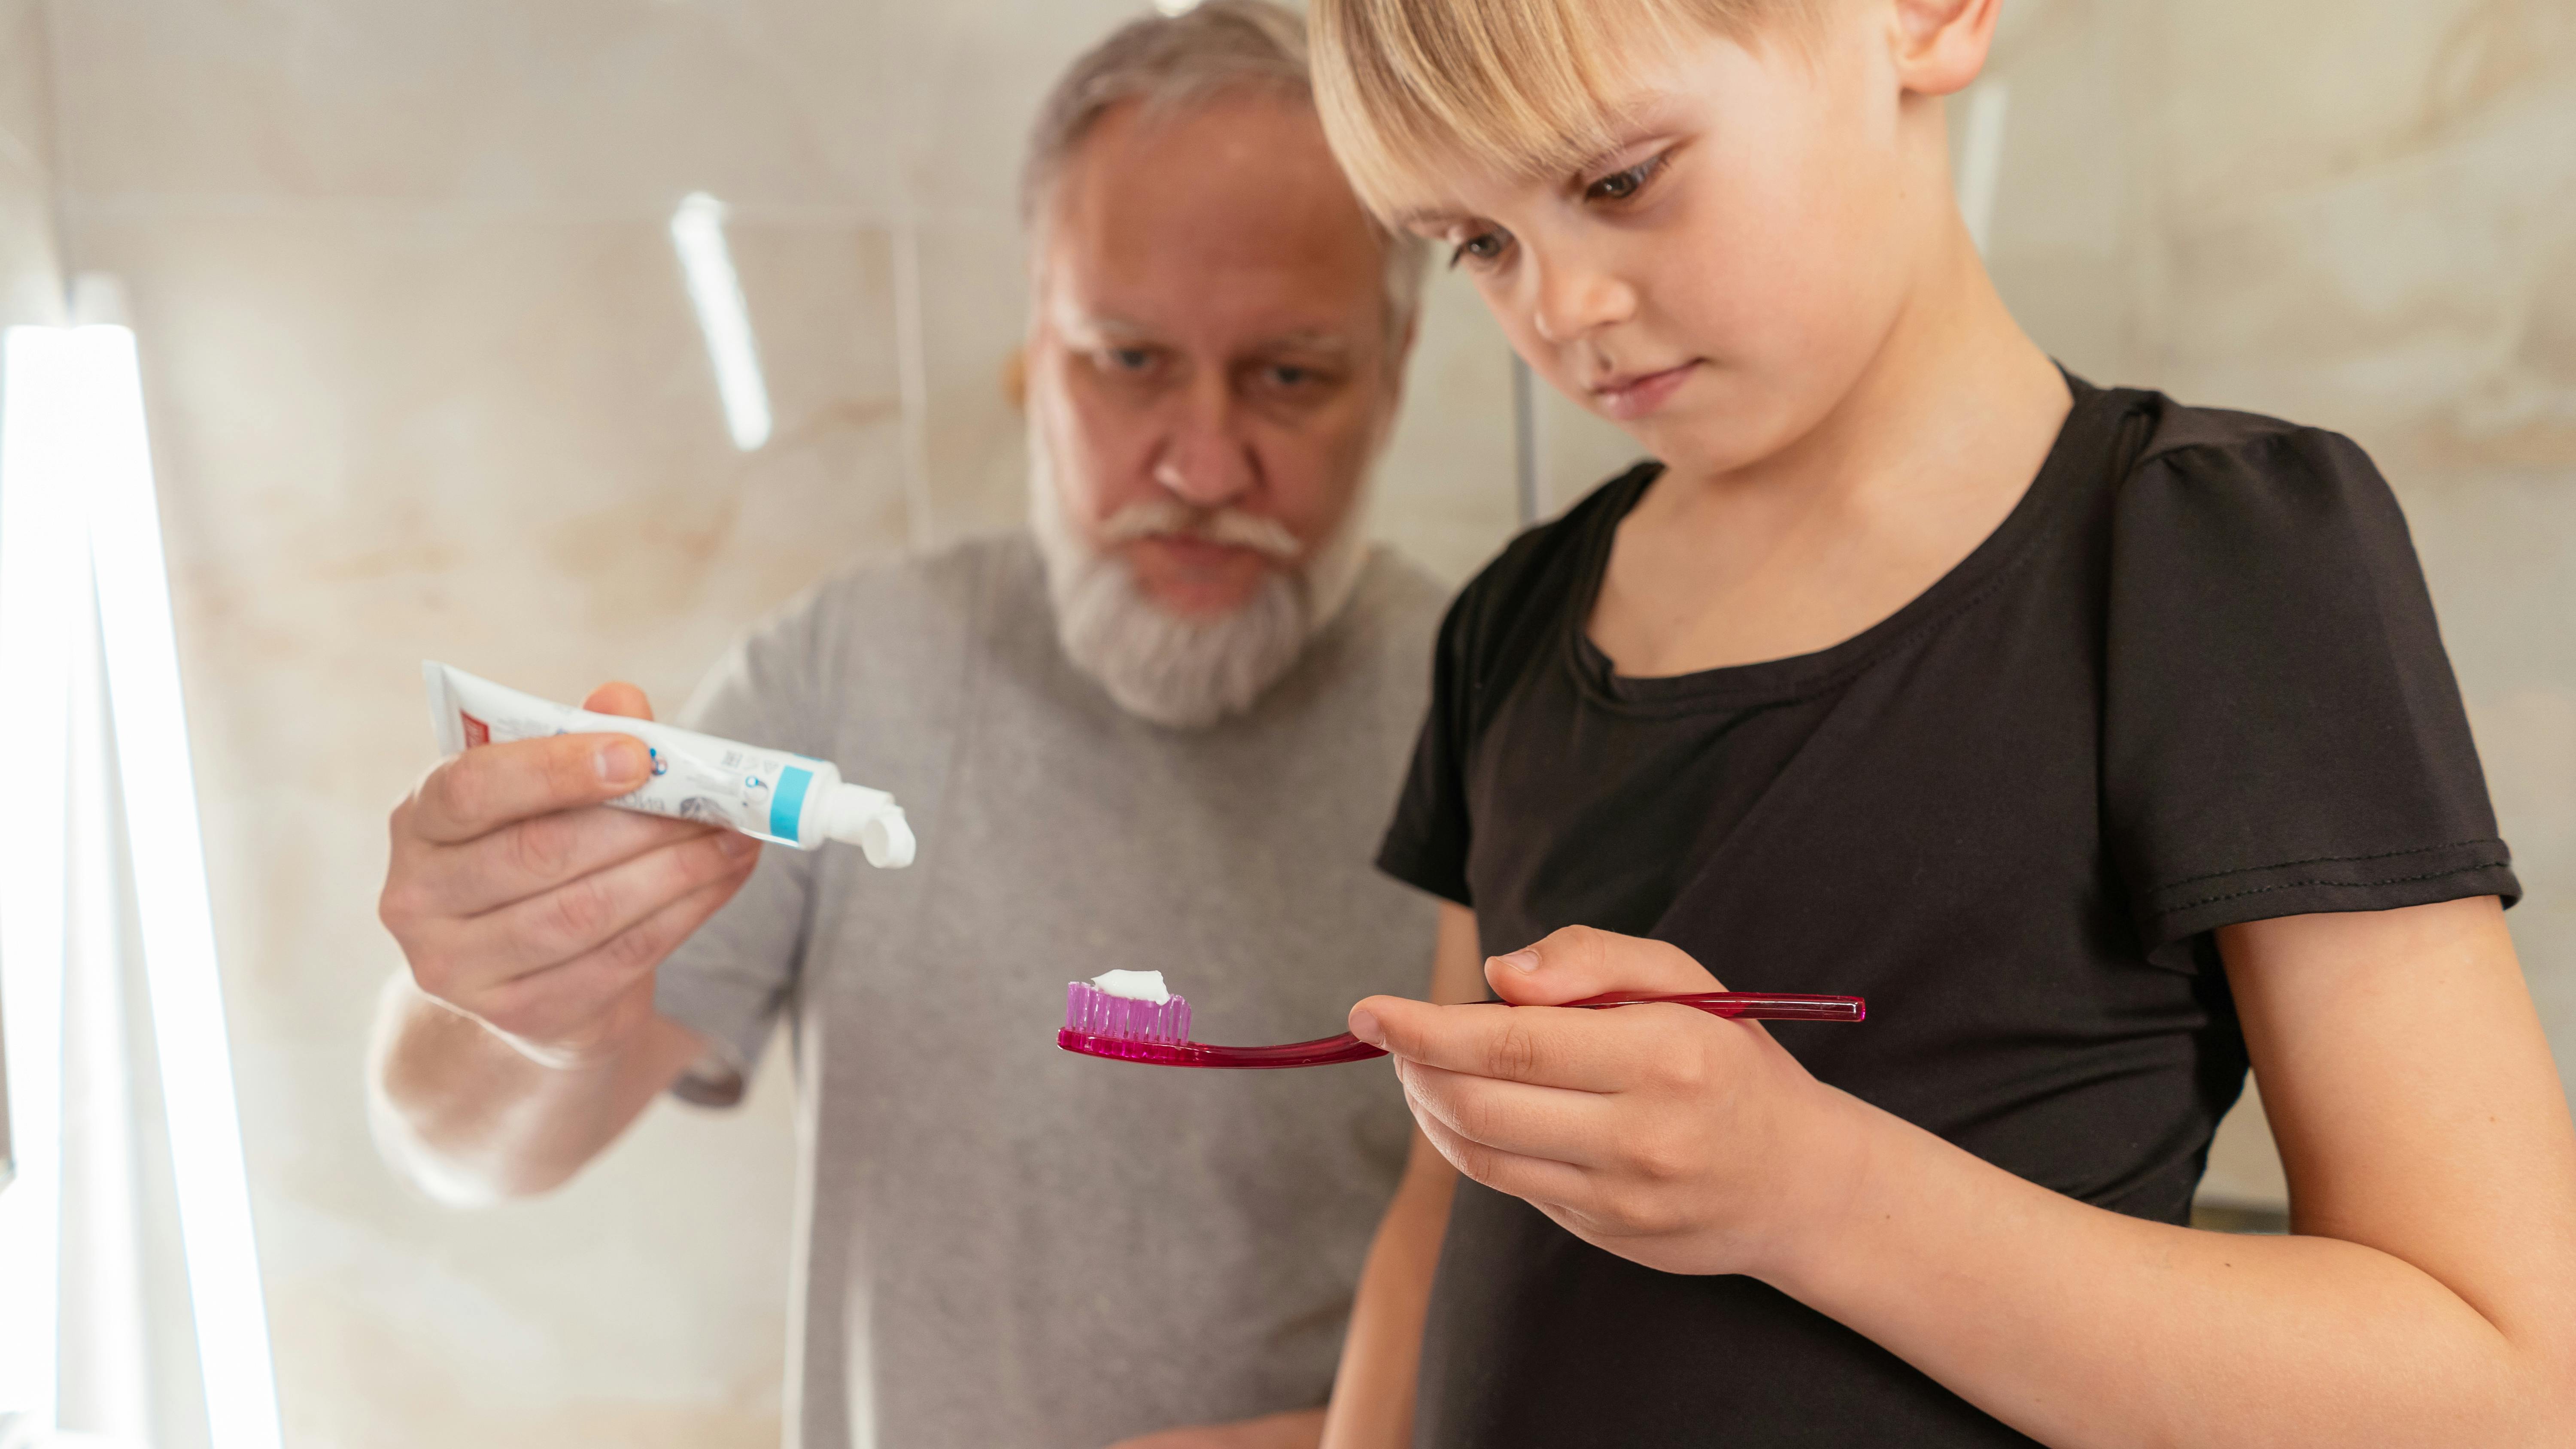 Grandpa putting toothpaste for kid